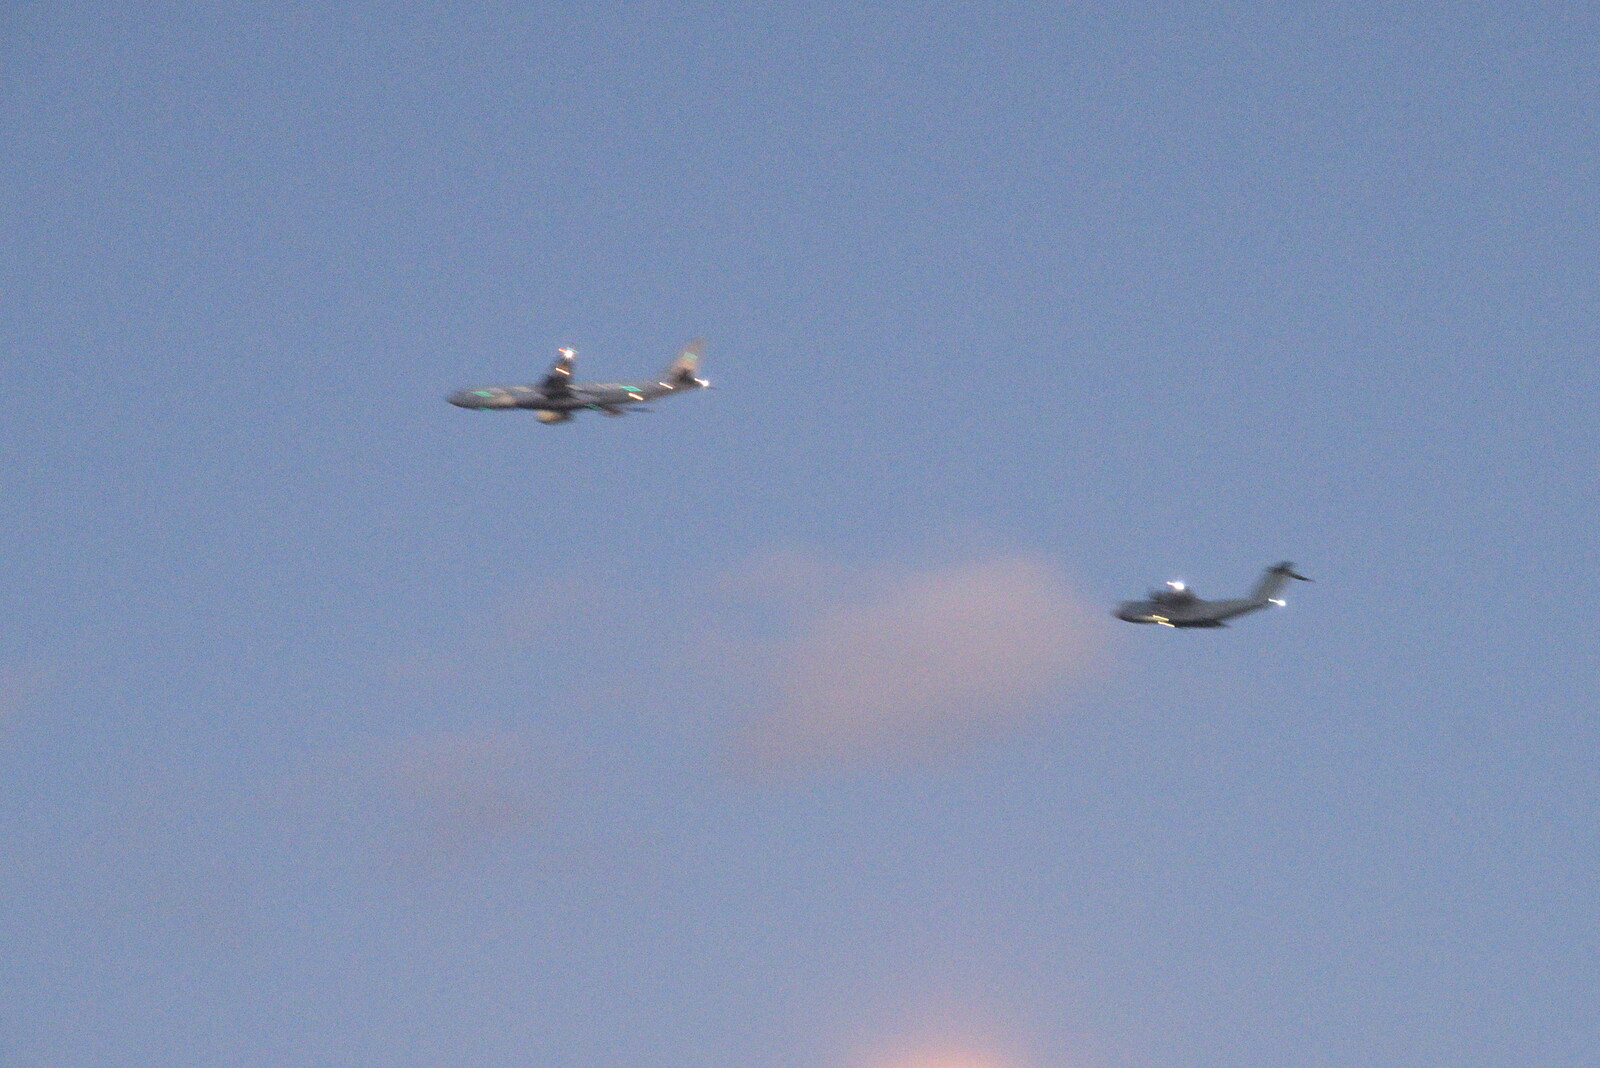 A passenger plane gets a close military escort from Five Days in Lanzarote, Canary Islands, Spain - 24th October 2021